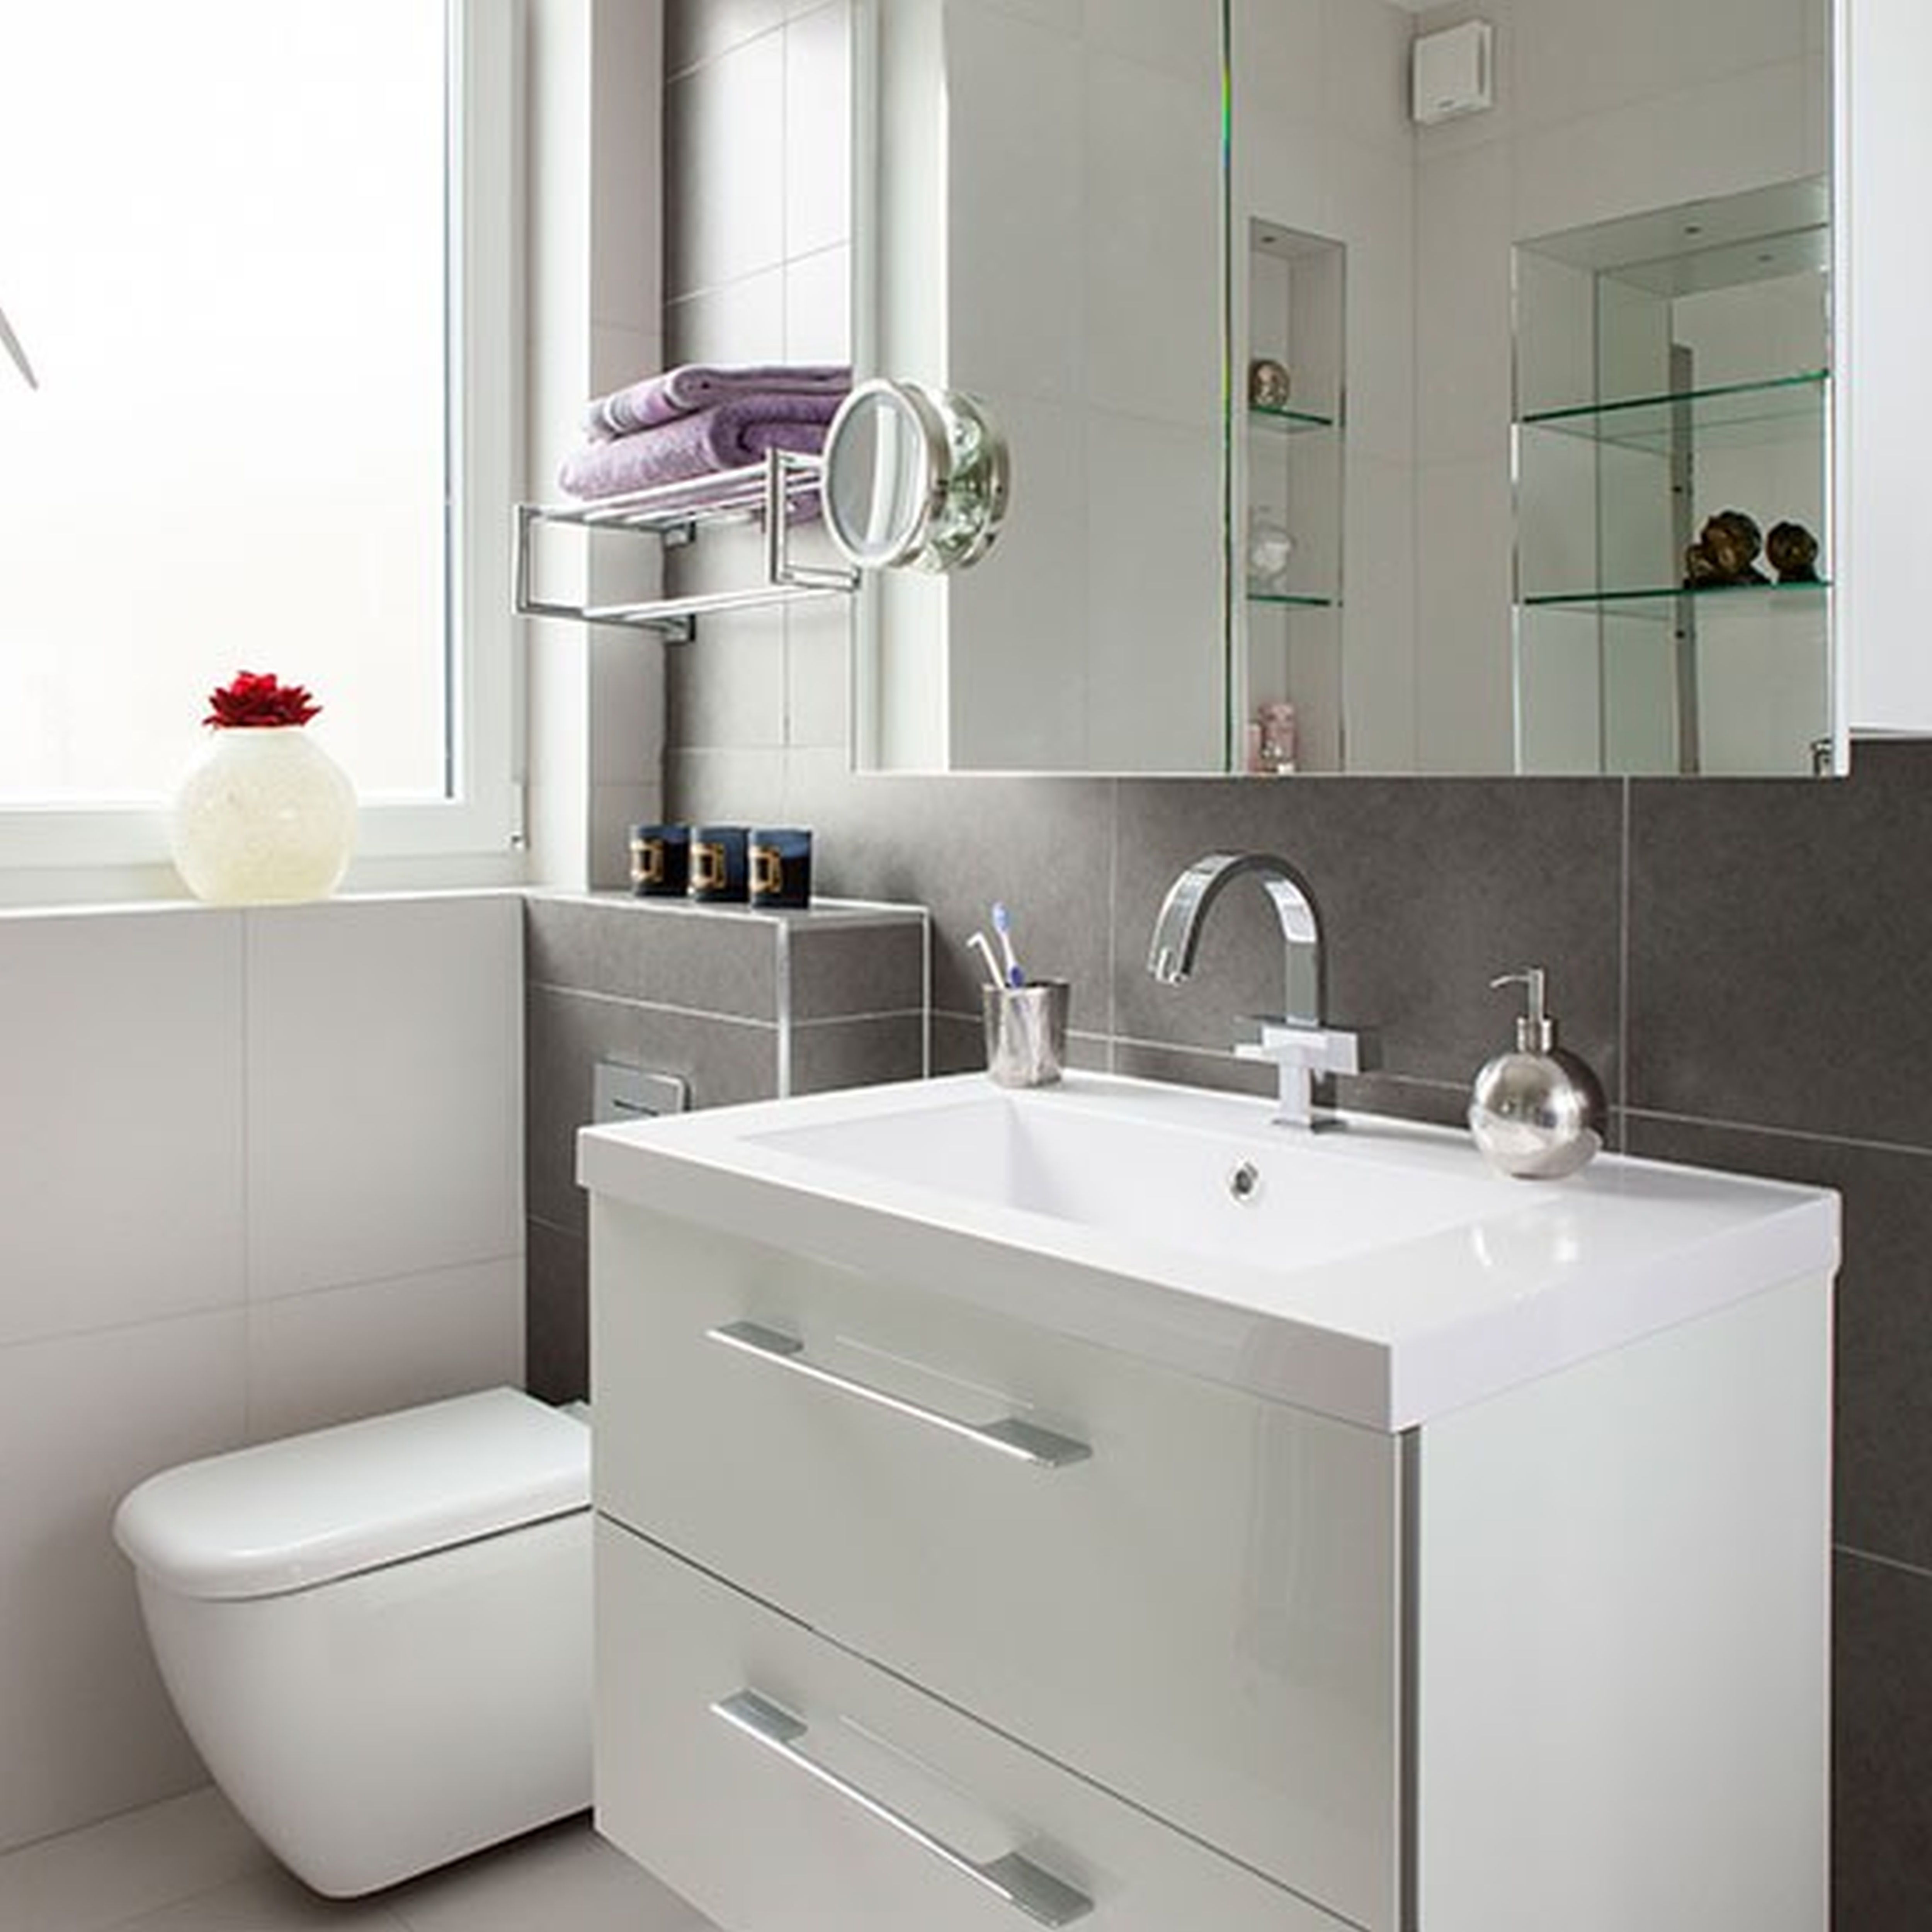 interior-bathroom-bathroom-ideas-with-white-wooden-bath-vanity-attached-on-grey-ceramic-tiled-backsplash-also-white-wooden-floating-cabinet-with-double-mirror-door-panel-as-well-as-small-bathroom-des